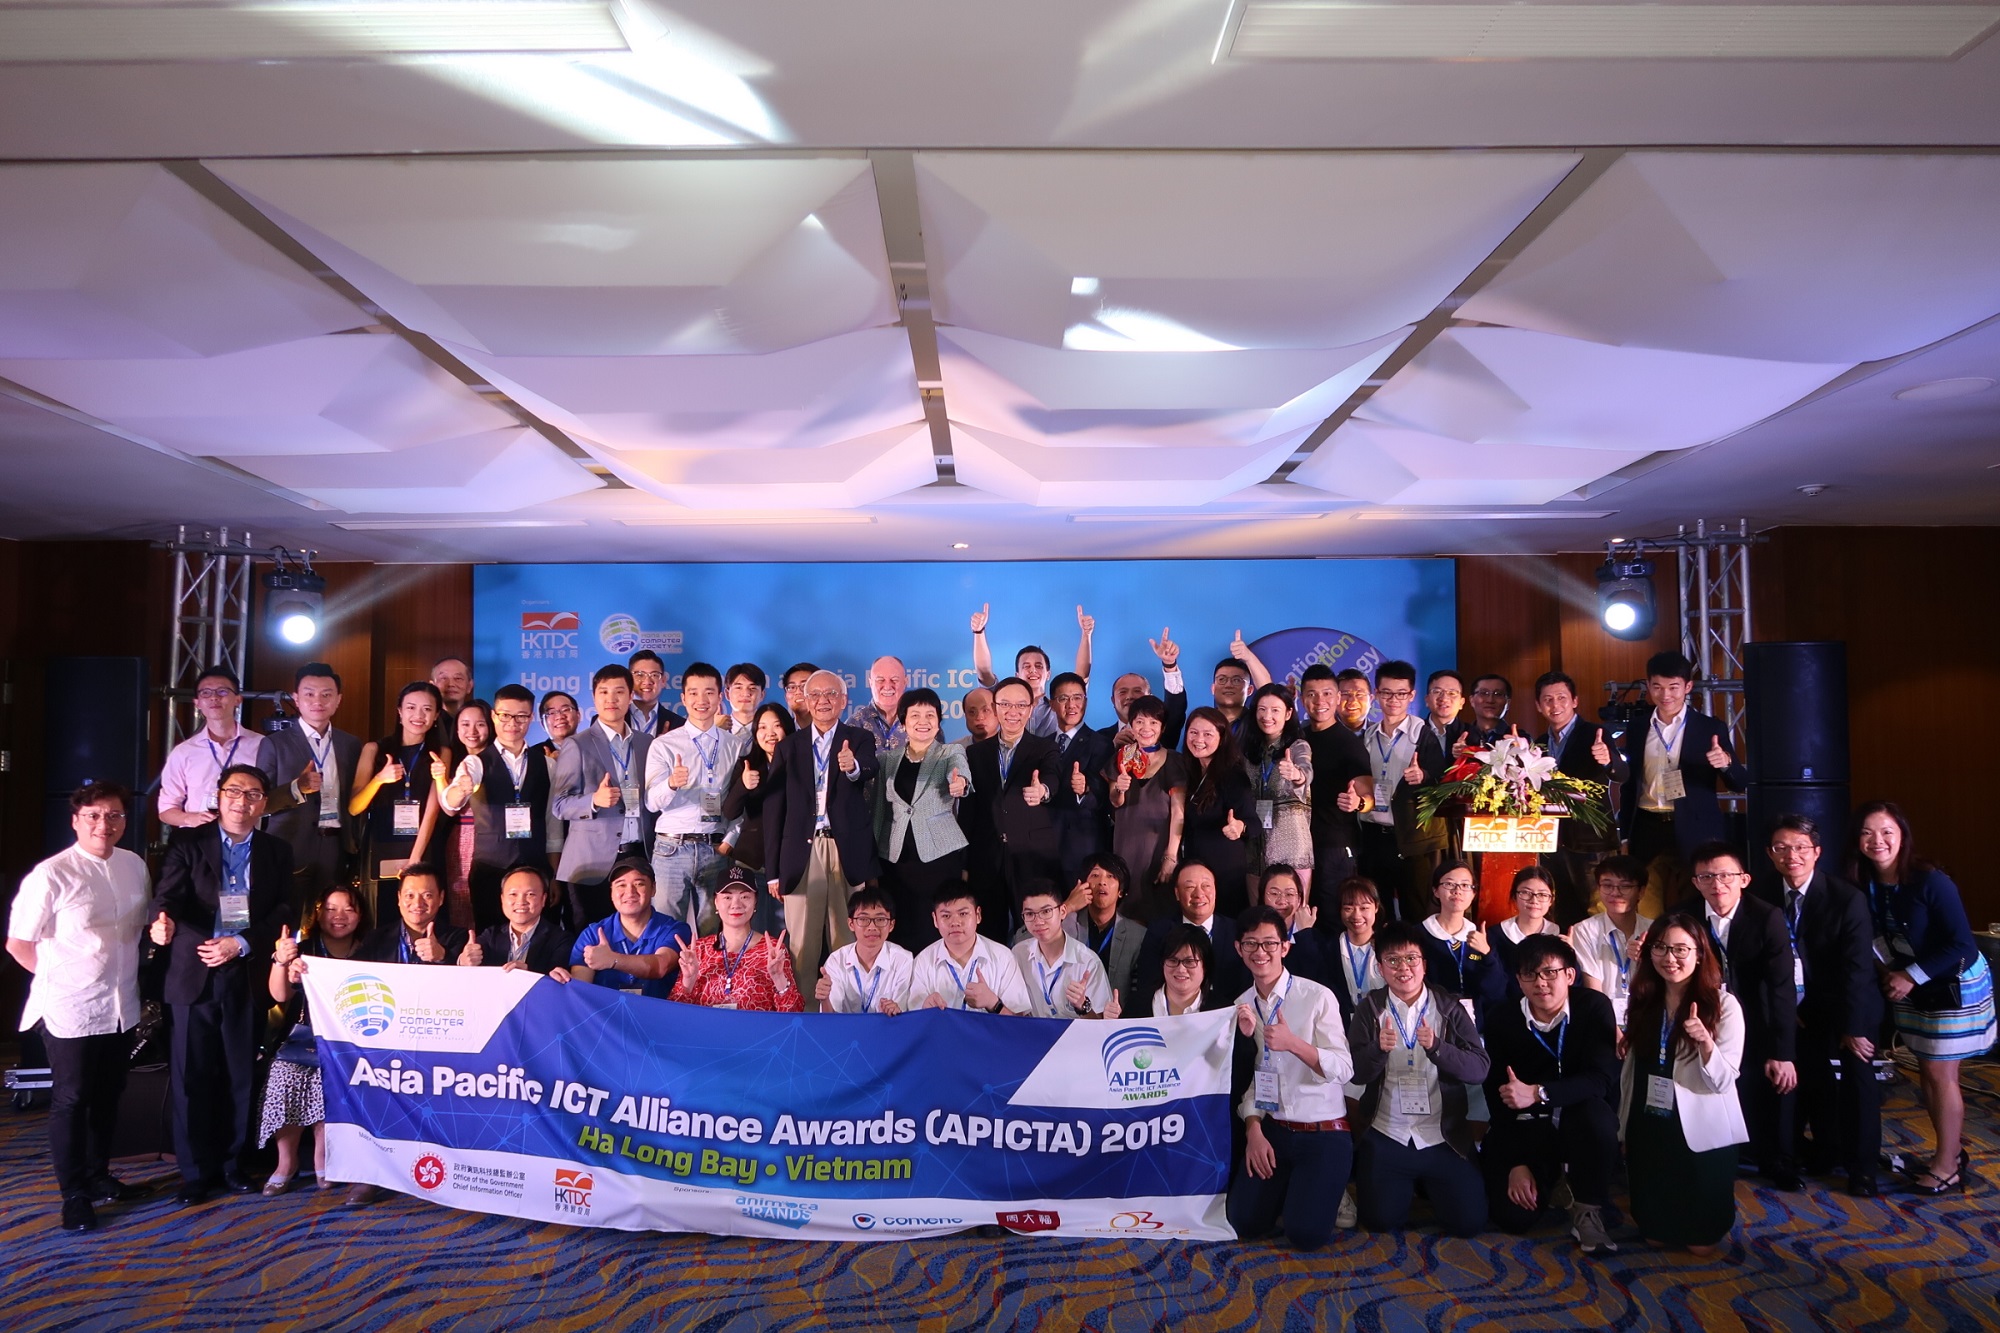 Mr. Victor Lam, Government Chief Information Officer, in group photo with the Hong Kong delegation and other guests at the “Hong Kong Reception at Asia Pacific ICT Alliance (APICTA) Awards Vietnam 2019”.